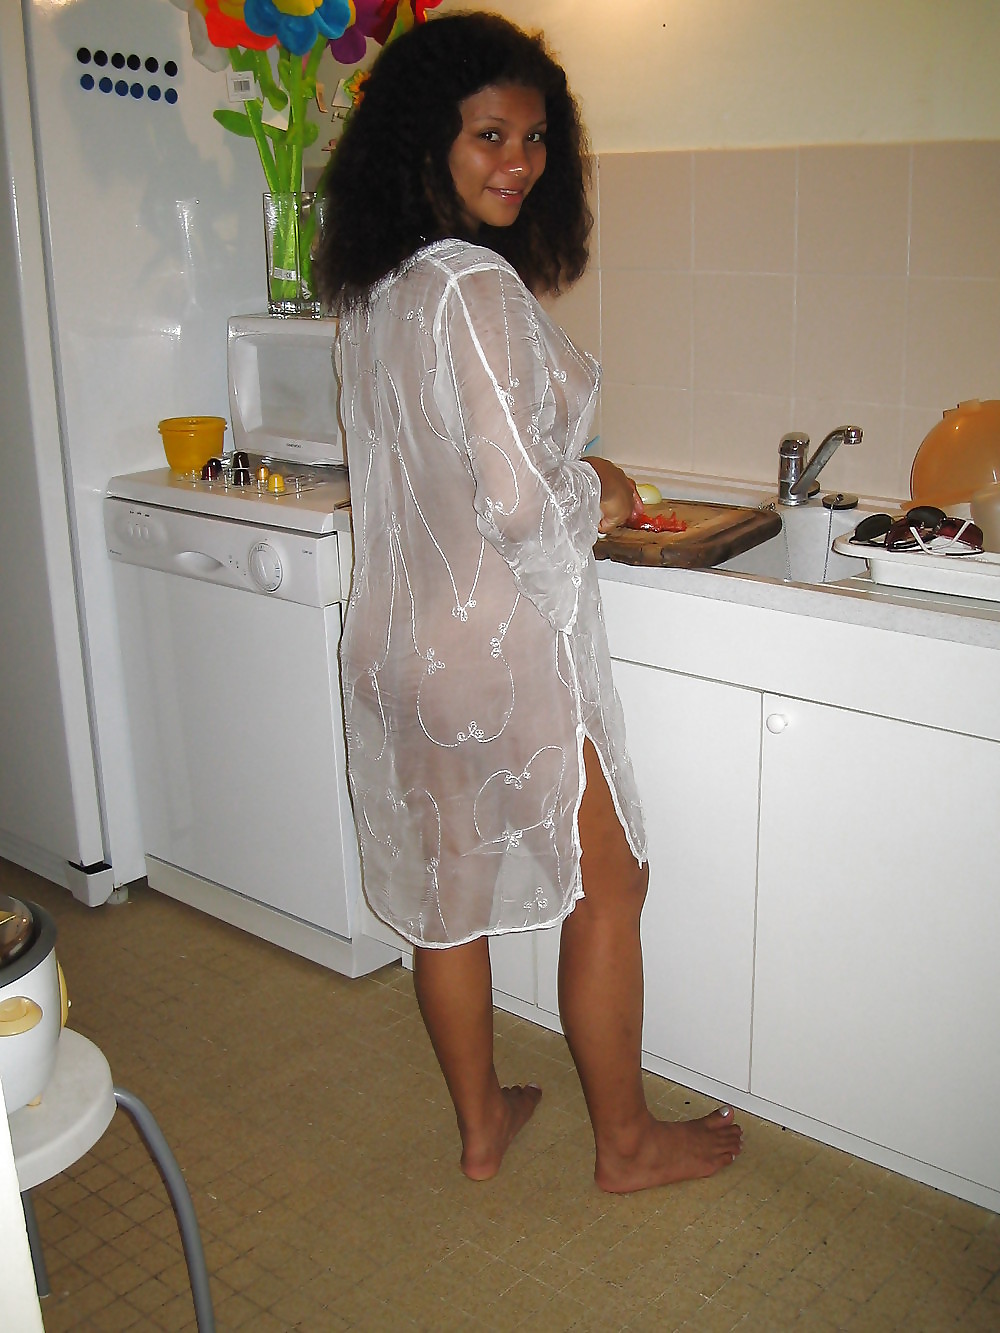 moglie ai fornelli - wife in the kitchen adult photos